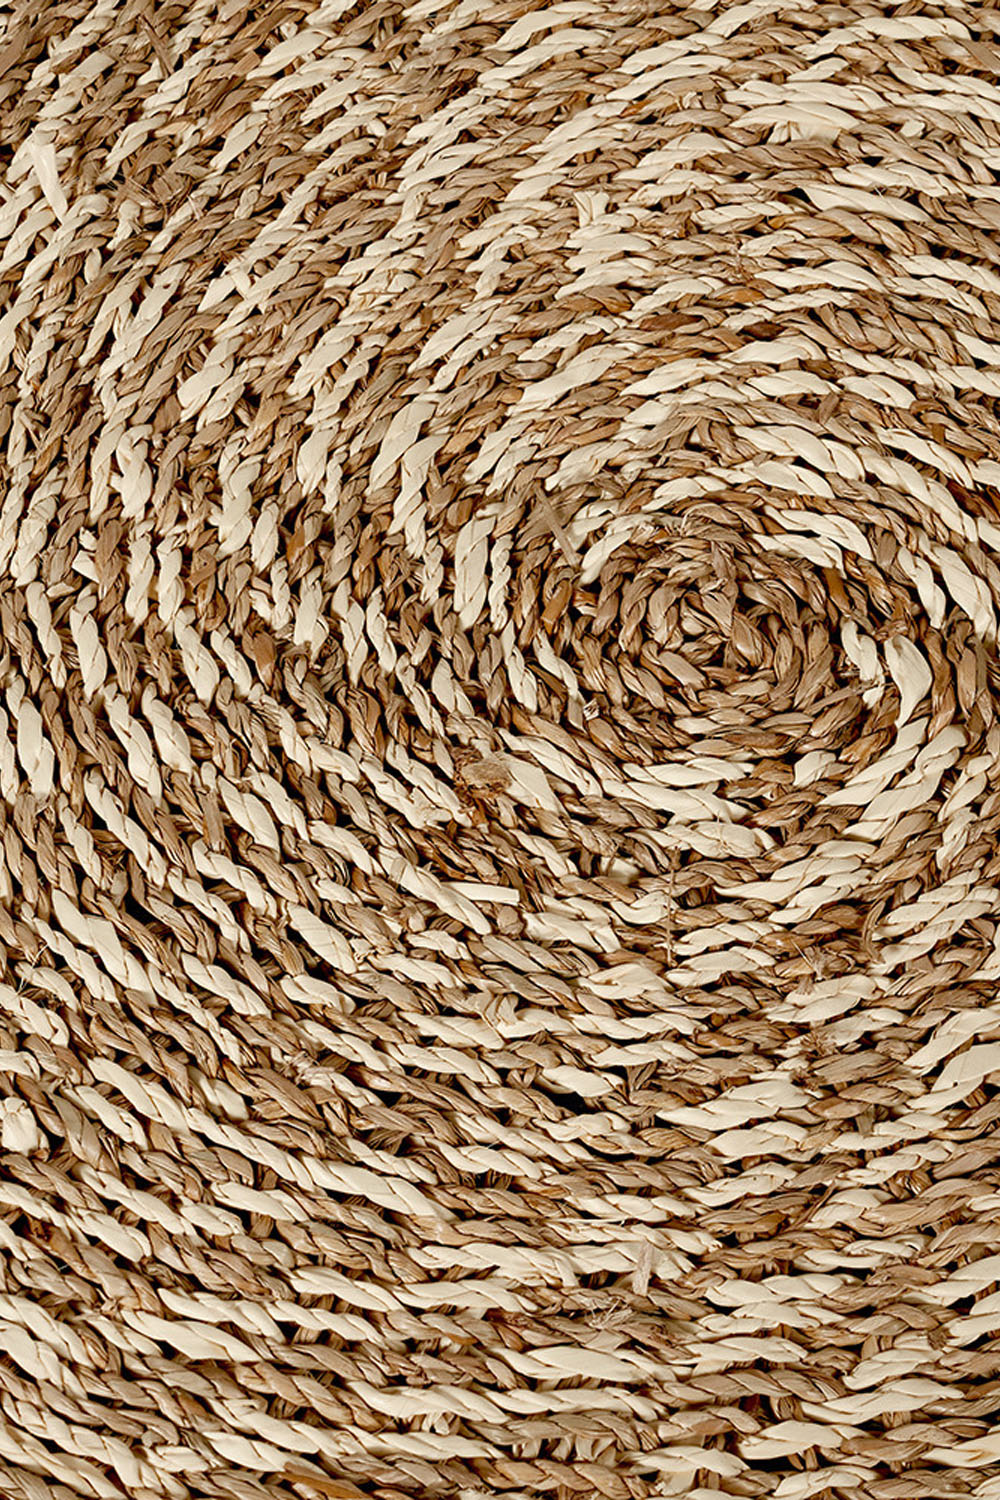 Seagrass and Palm Leaf Round Rug